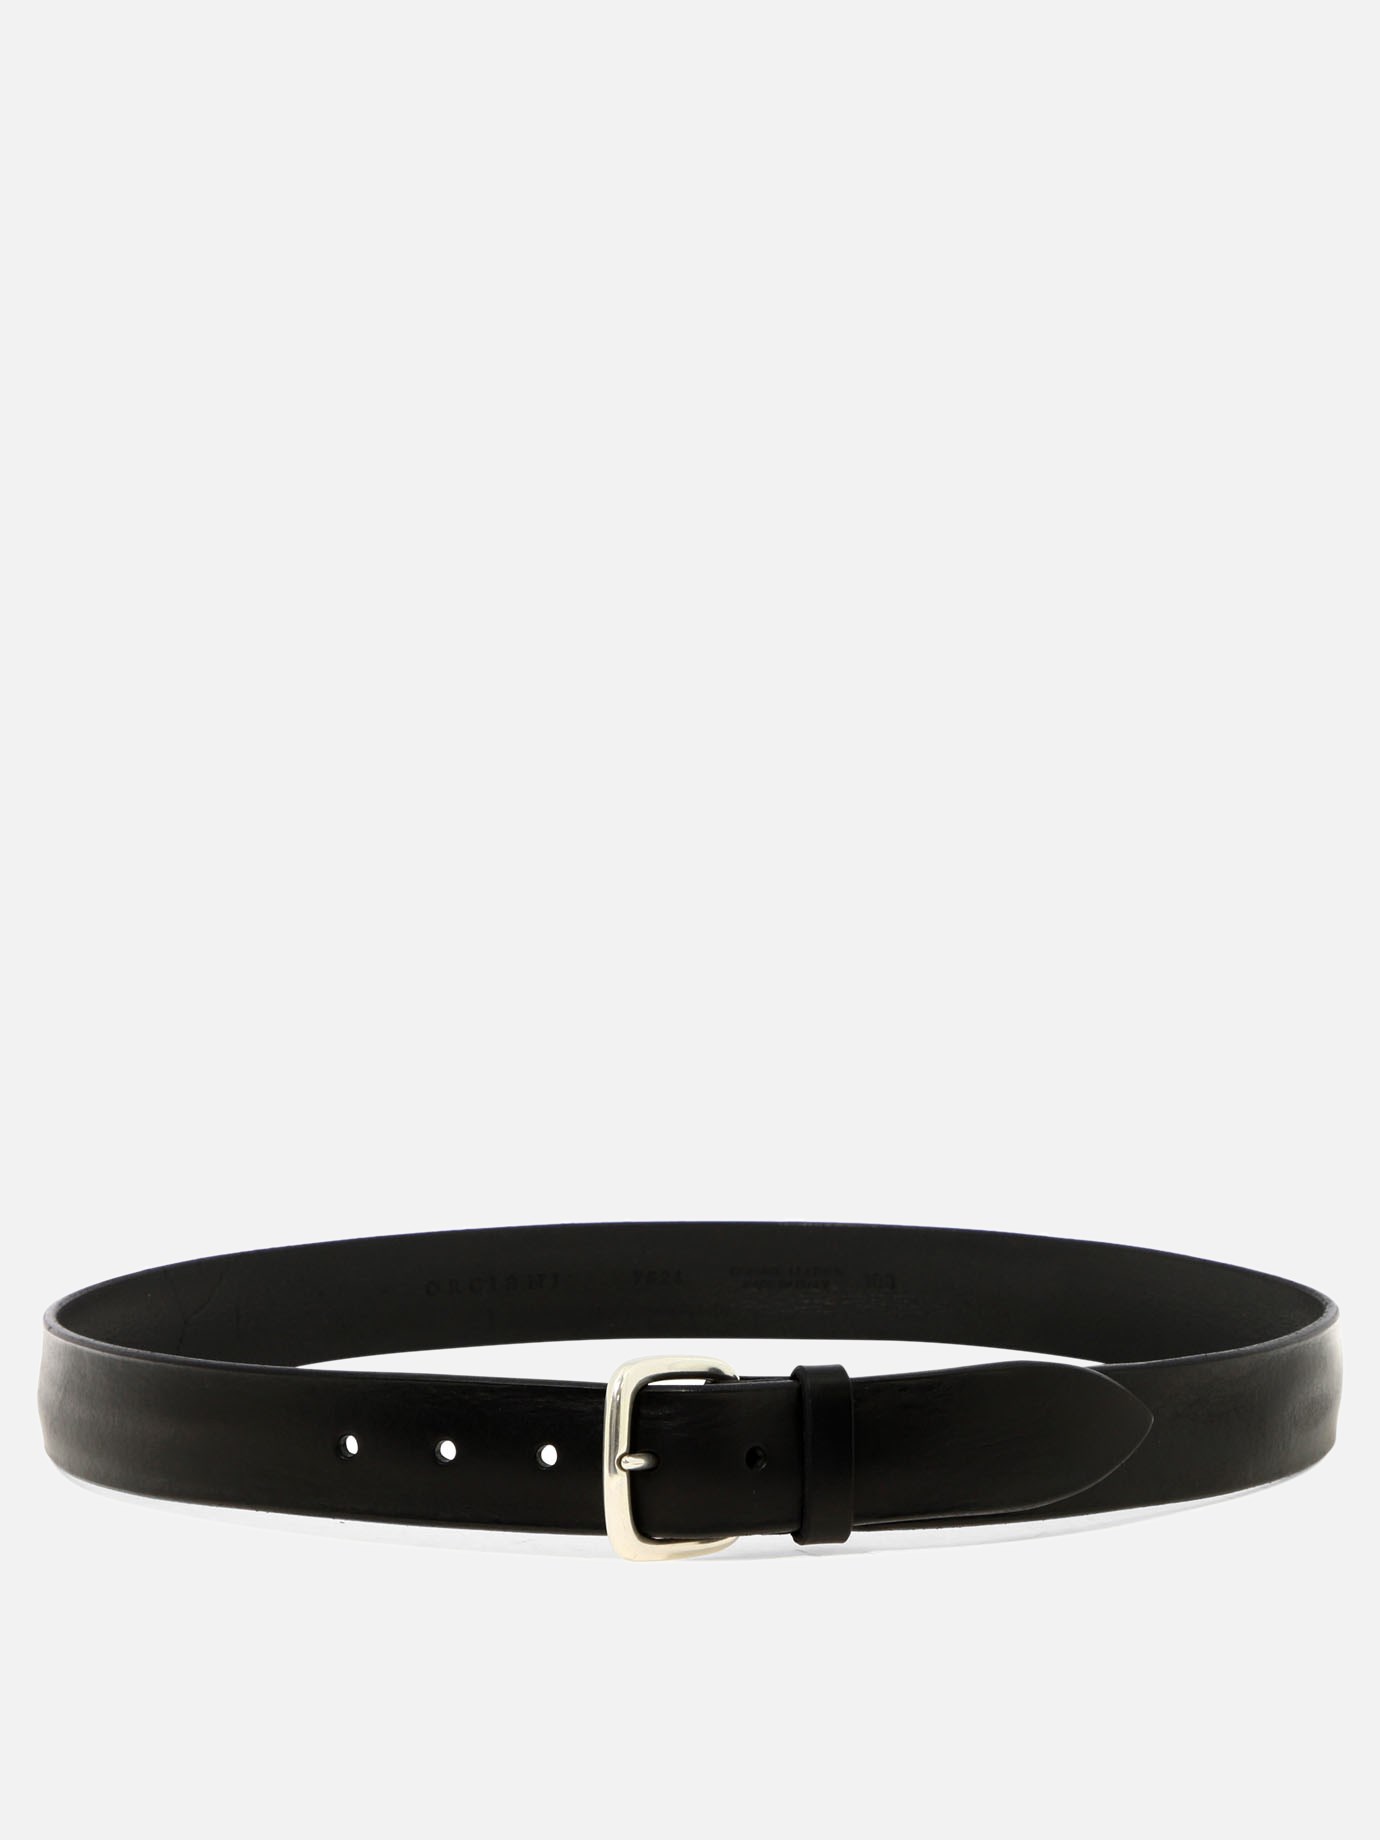 Bull Soft  beltby Orciani - 3